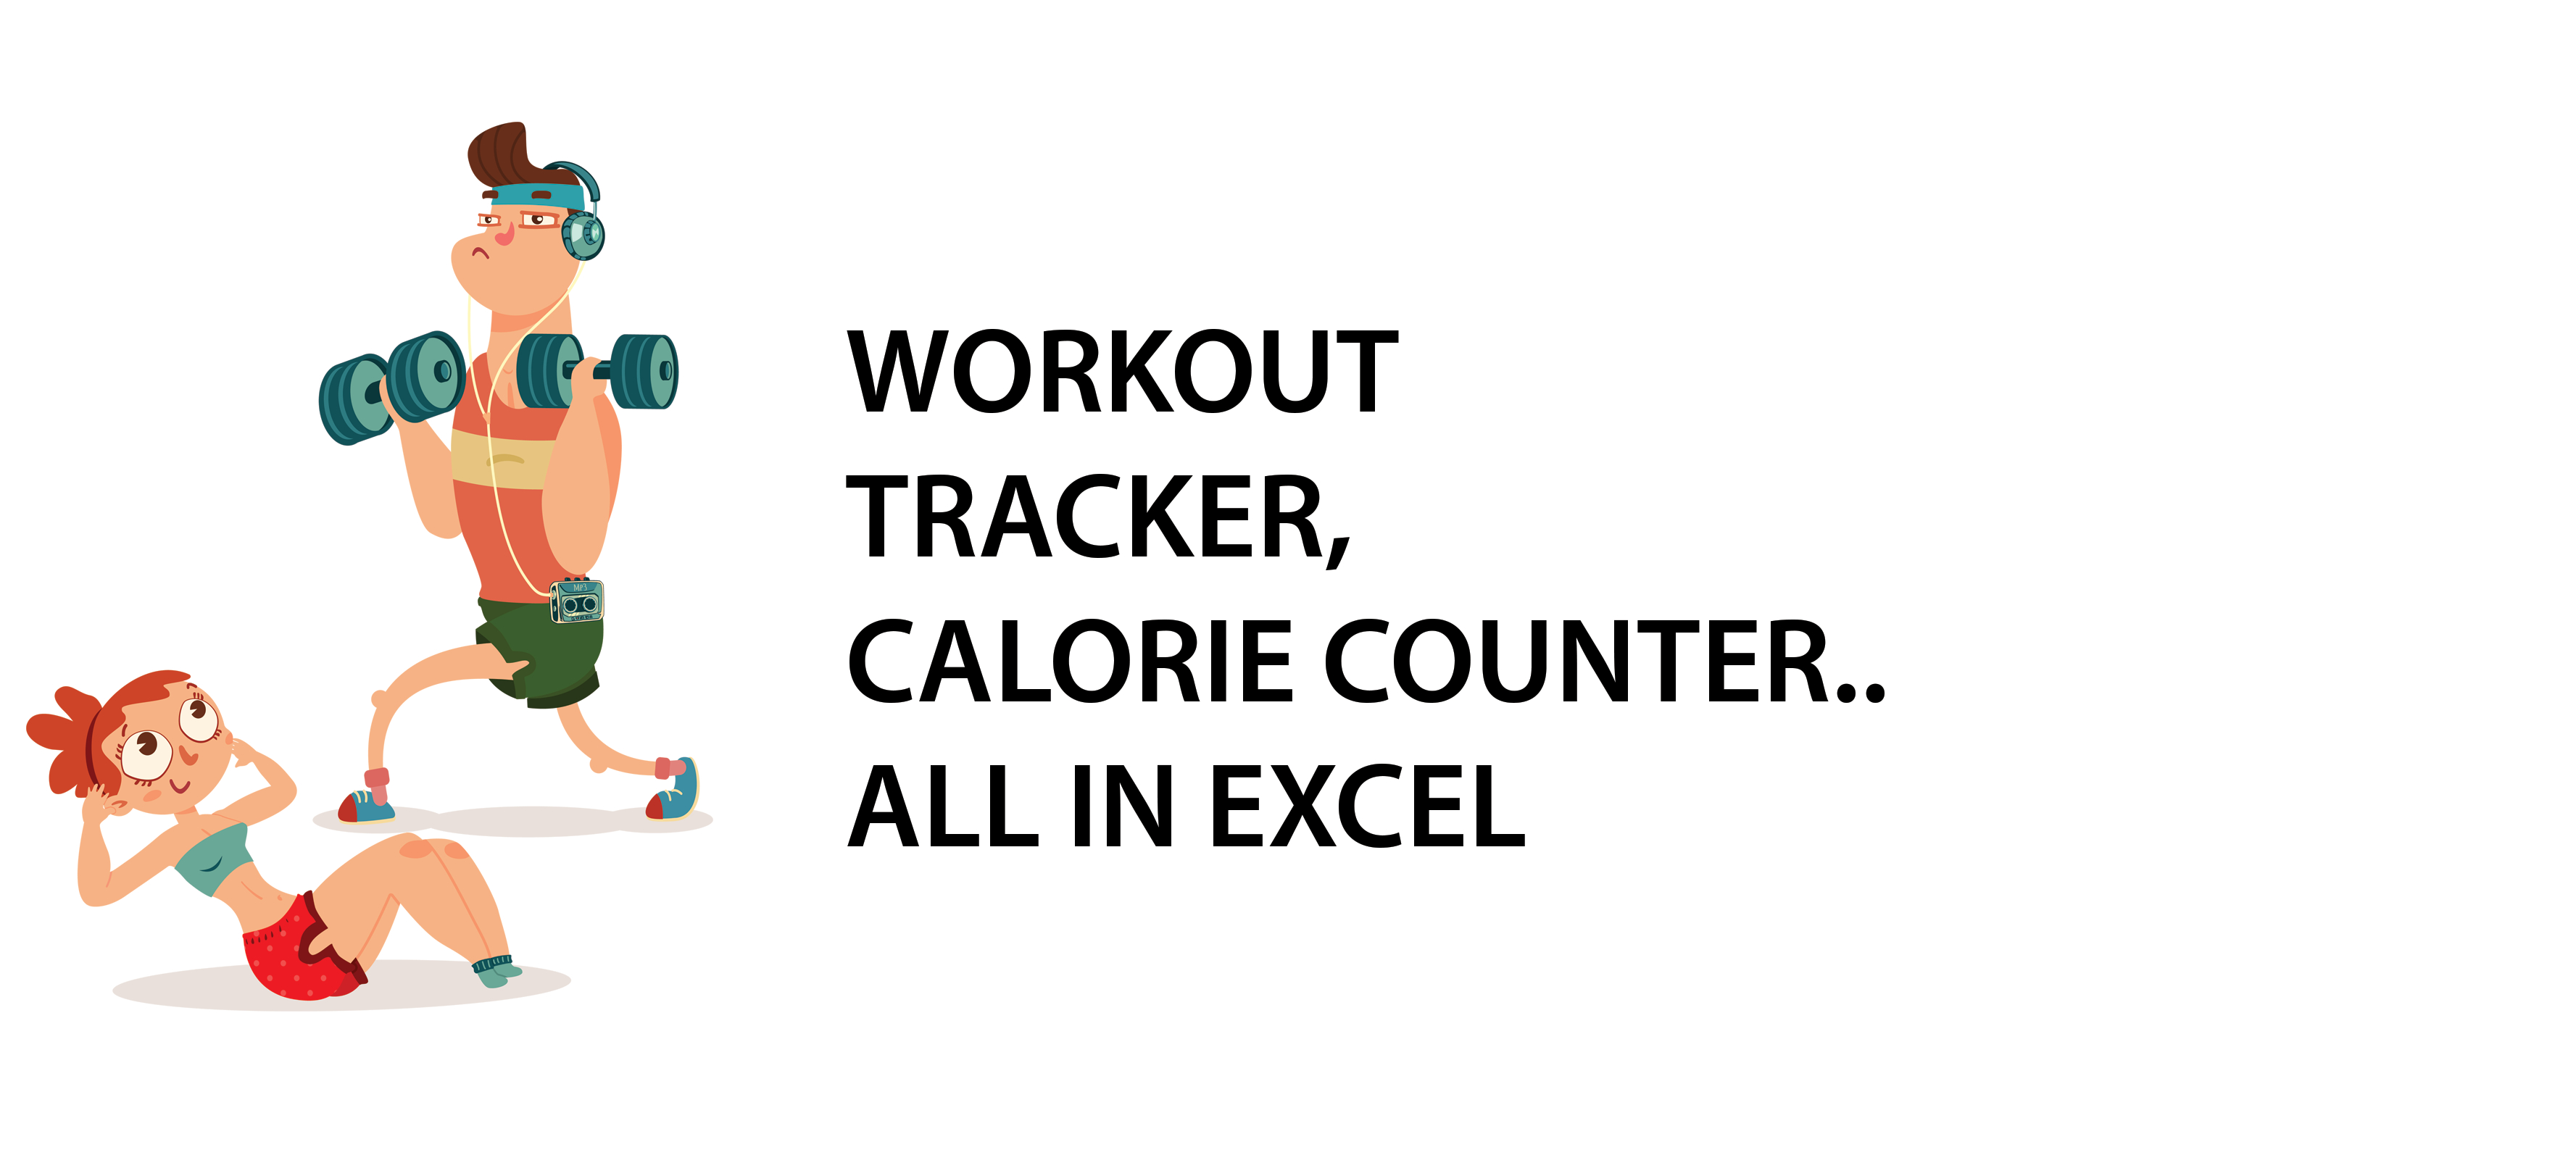 Calorie Counter Excel Spreadsheet Free Download inside Workout Tracker, Calorie Counter…all In Excel  Excel With Business